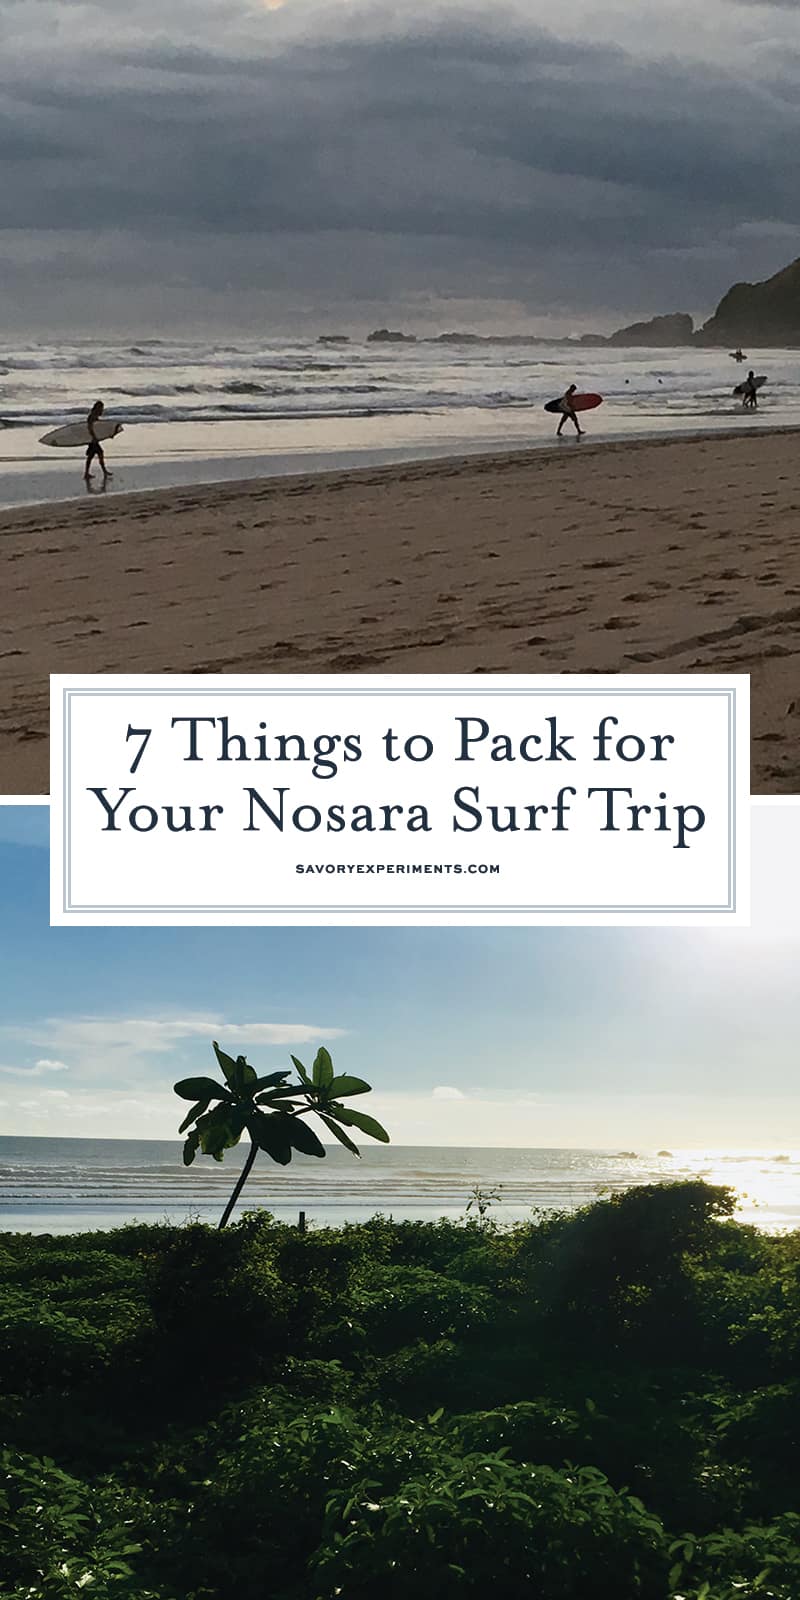 7 Things to Pack for your surf trip to Nosata, Costa Rica to be well prepared and ready for the trip of a lifetime! #surfing #nosara #costarica www.savoryexperiments.com 